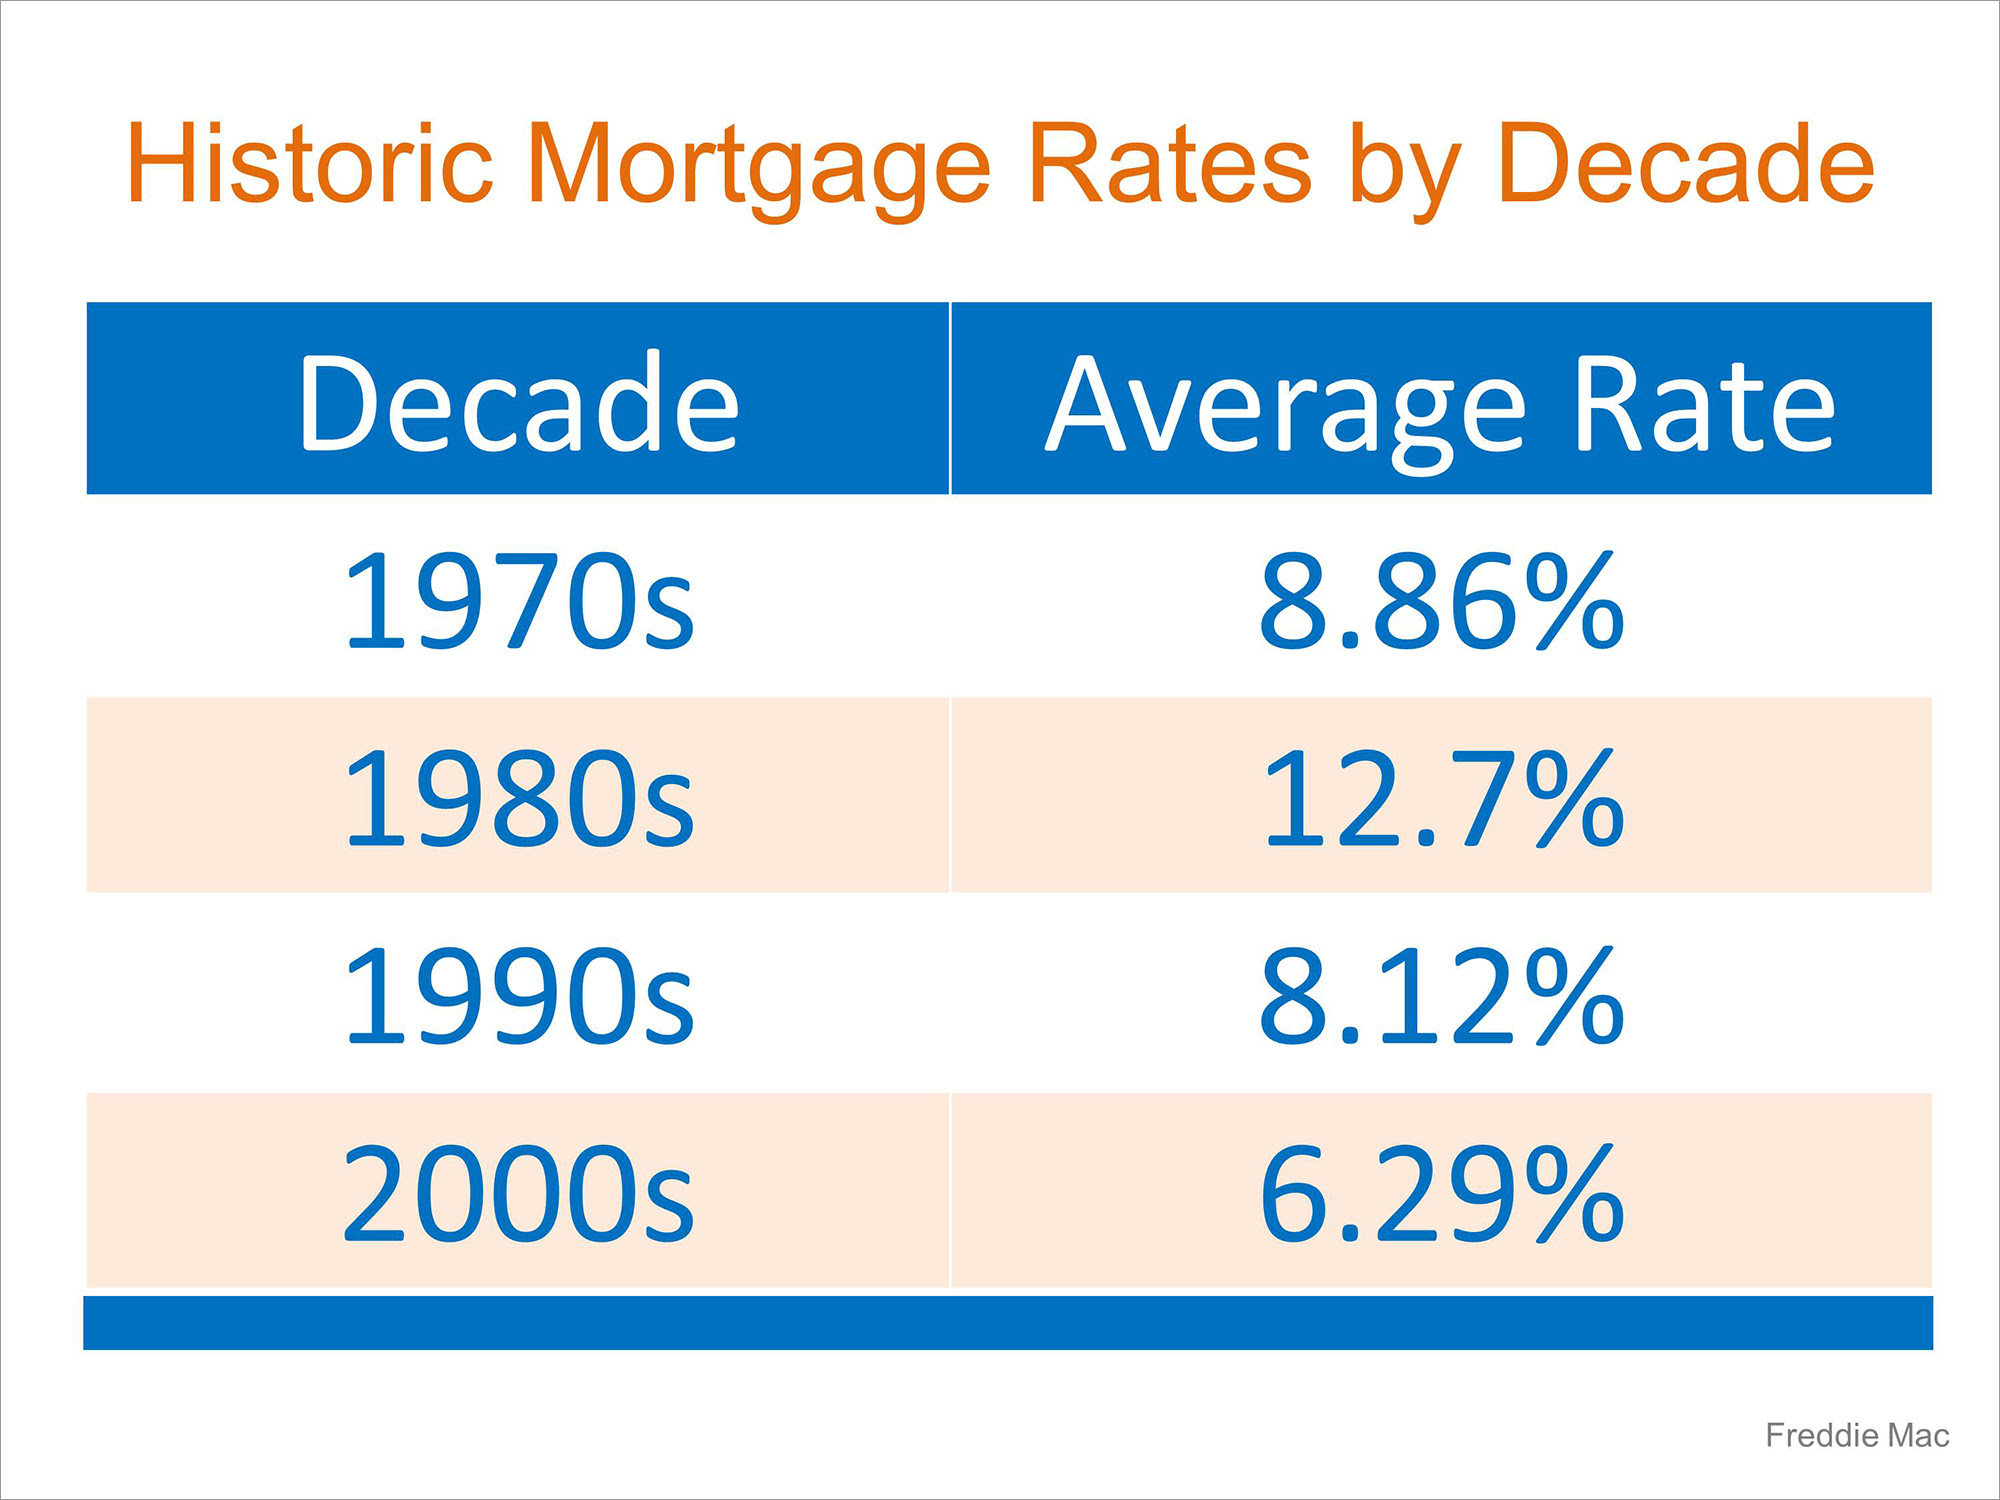 Mortgage Interest Rates Just Went Up... Should I Wait to Buy? | MyKCM